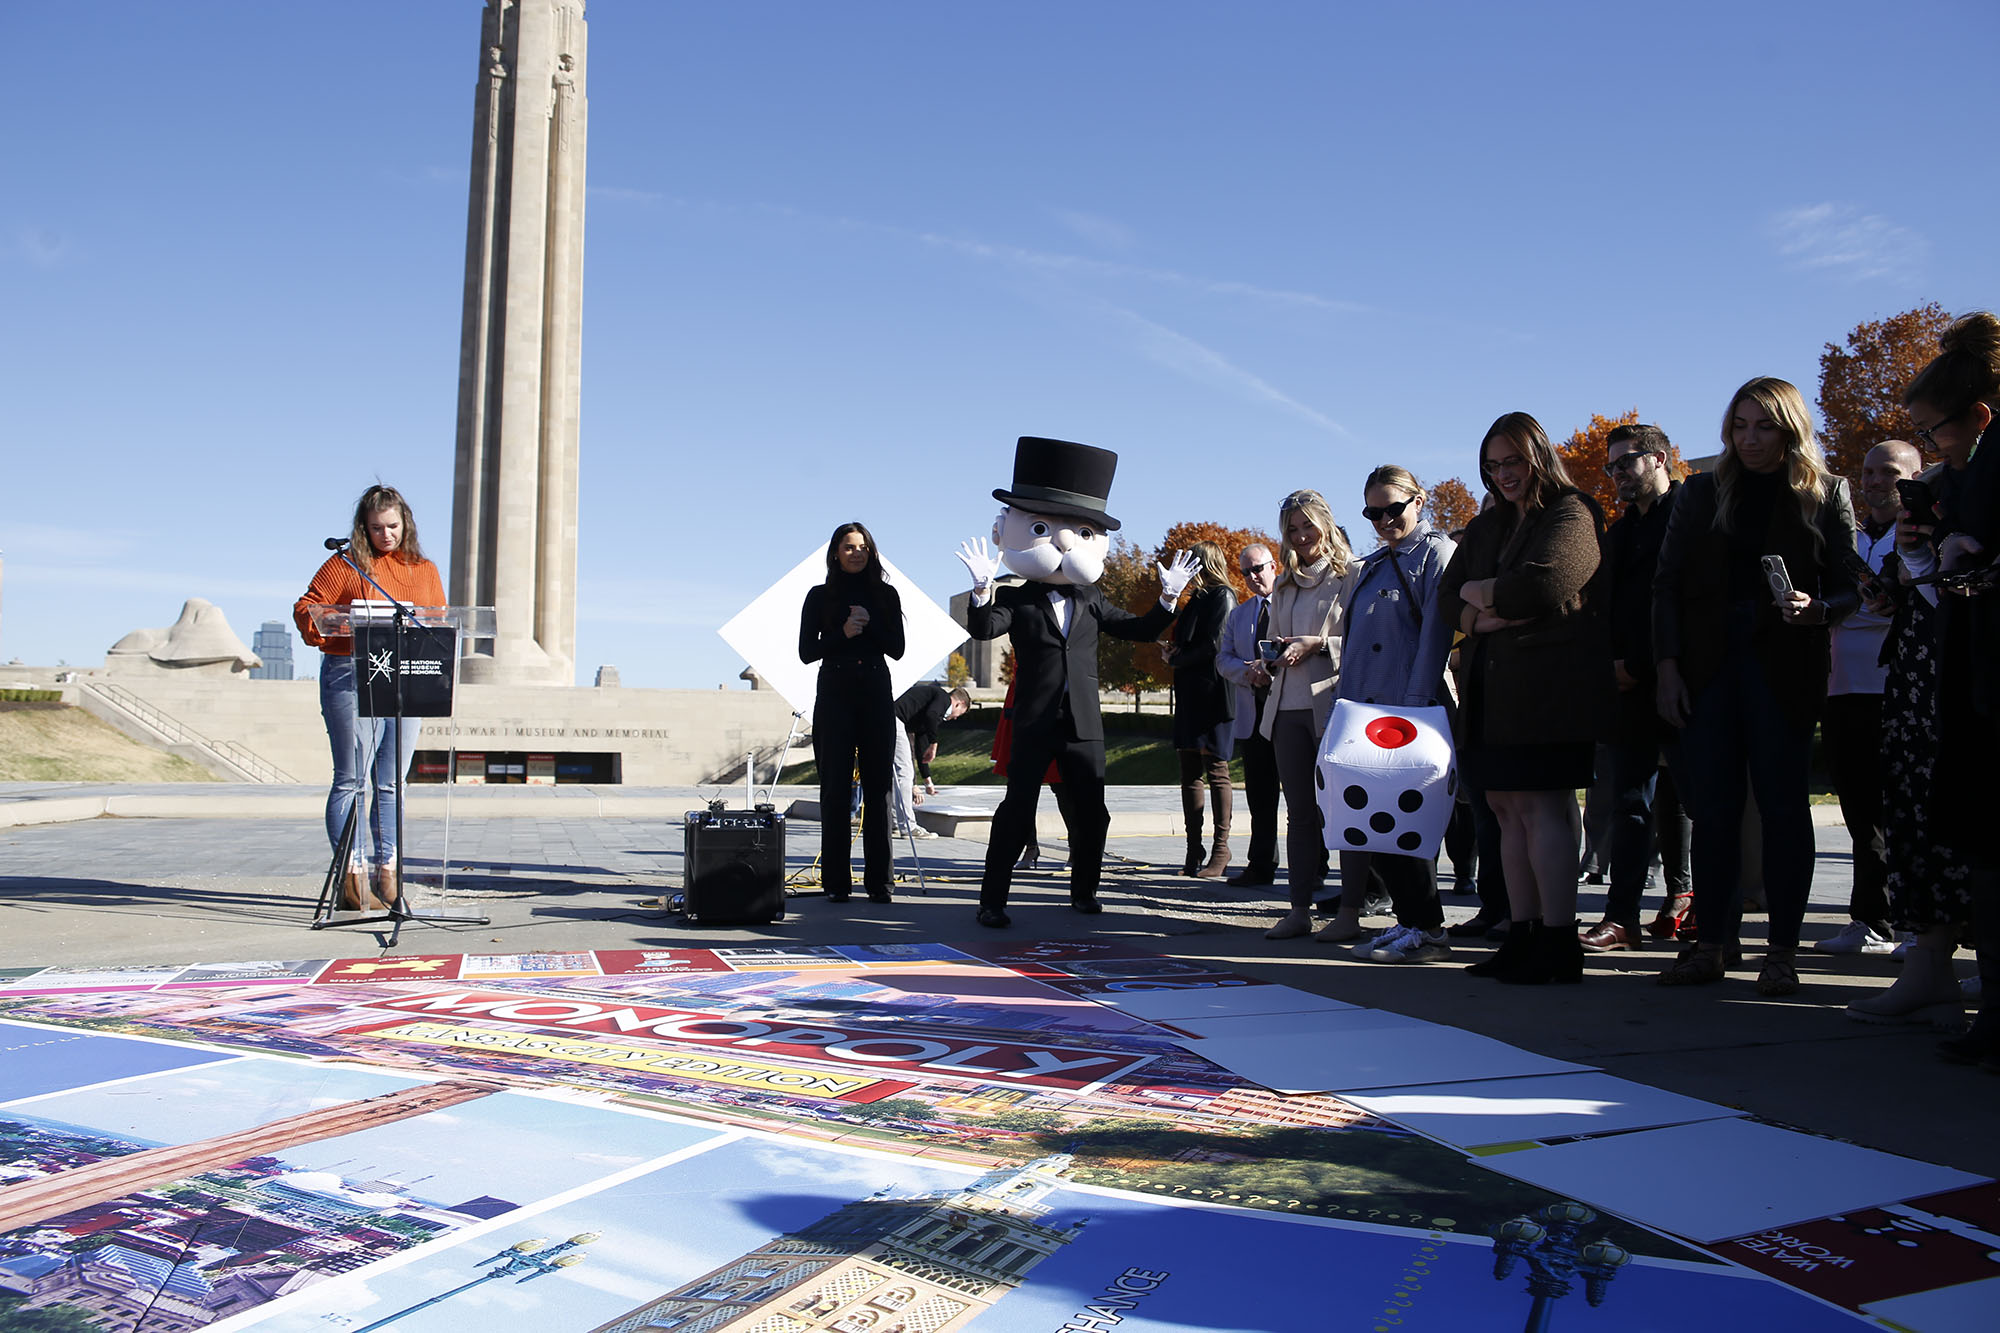 Modern photograph of an oversized version of a Monopoly board laid on the sidewalk in front of the Liberty Memorial Tower. Mr. Monopoly rolls an oversized die in front of a crowd.